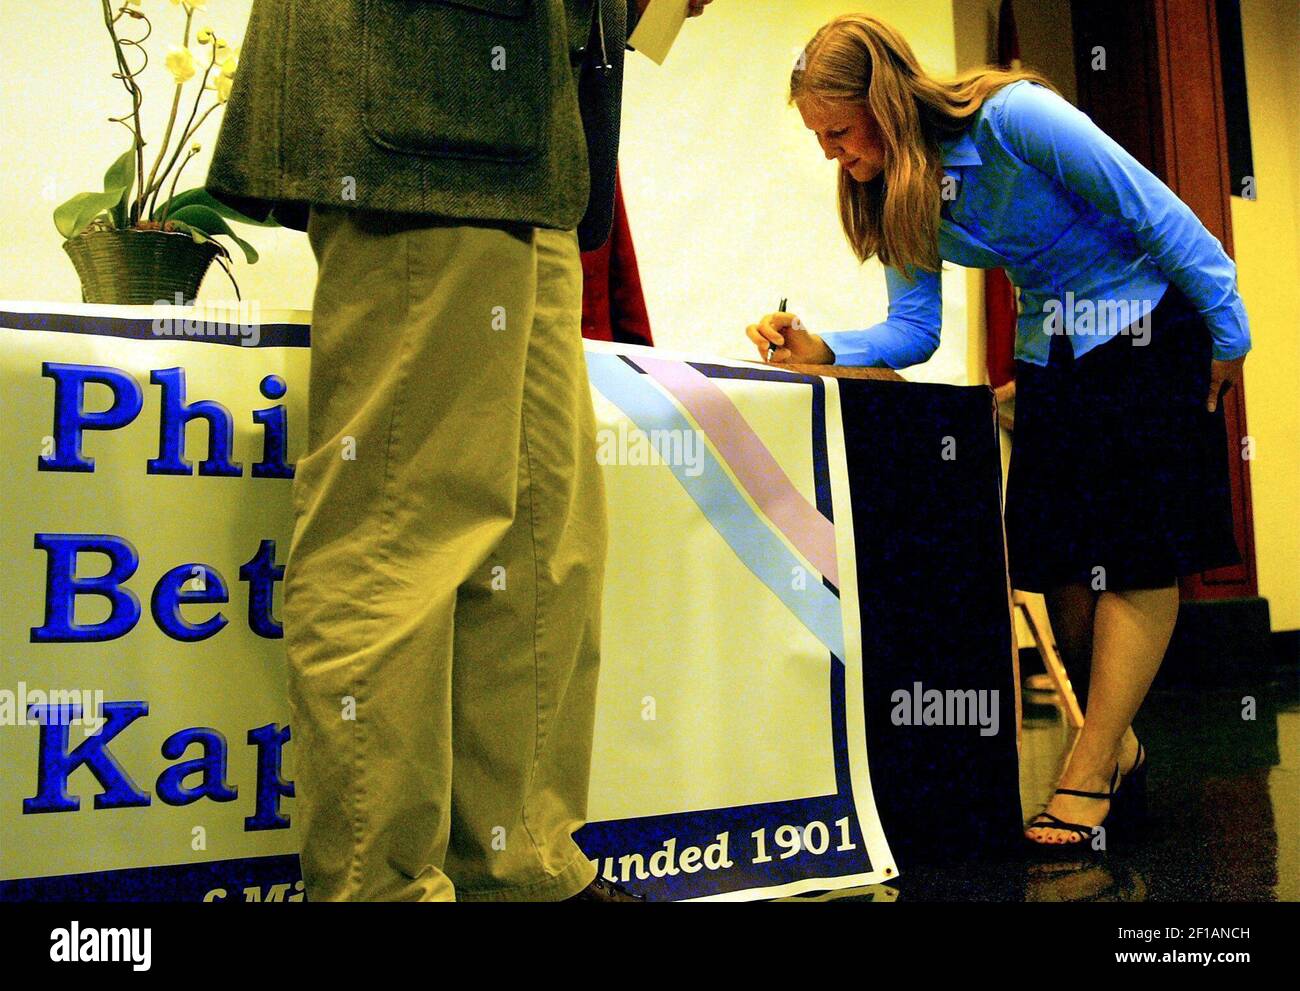 KRT US NEWS STORY SLUGGED: CMP-PHIBETAKAPPA KRT PHOTOGRAPH BY SAM LEONE/ST.  LOUIS POST-DISPATCH (May 20) Kelli Eimer signs the membership book during  the initiation ceremony of Phi Beta Kappa, an honorary society